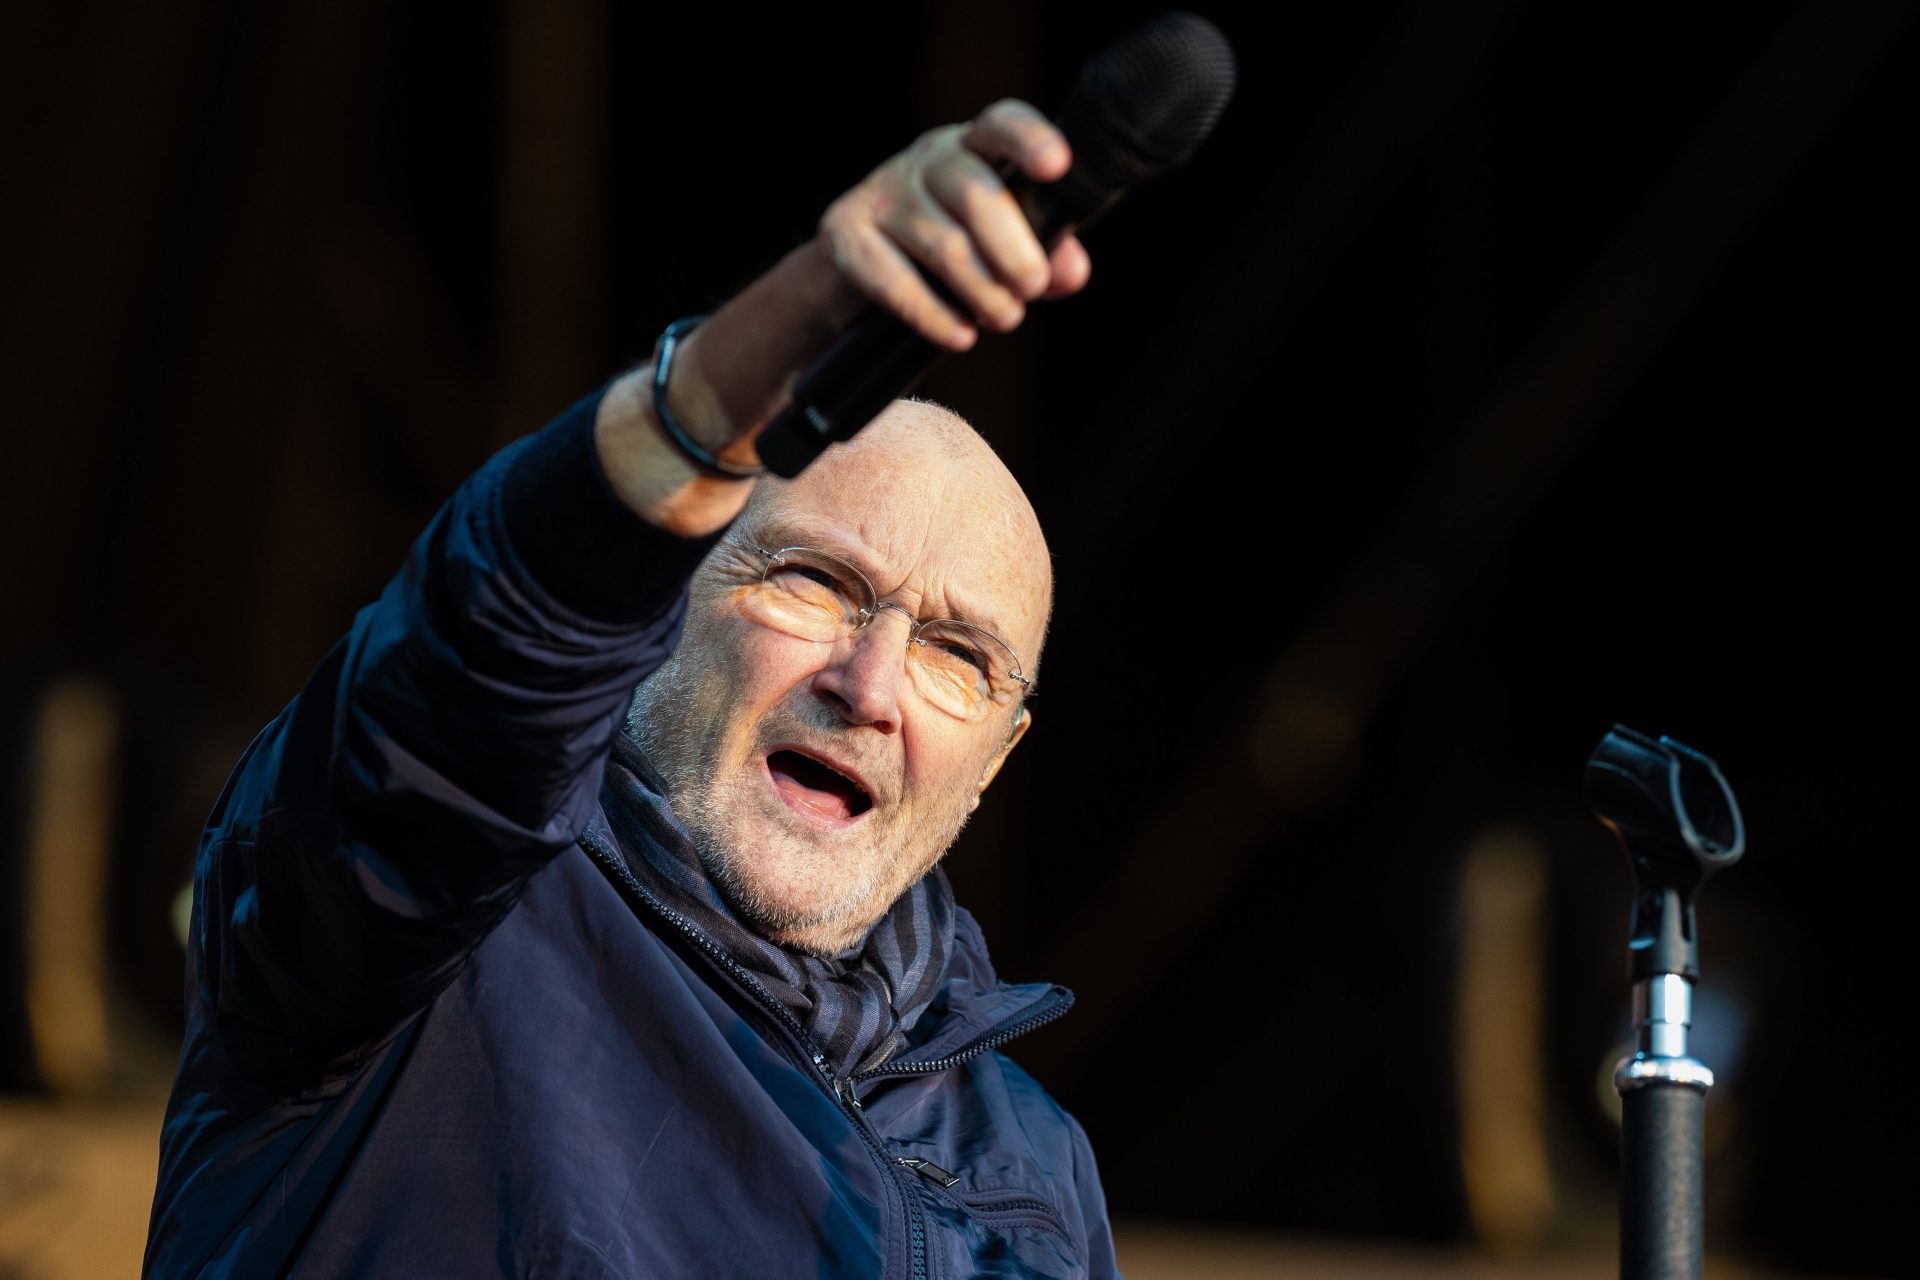 <p>The 'Last Domino?' tour was the swansong of British legend Phil Collins and his band Genesis. In London's O2 Arena in 2022, he confirmed that they would not perform again and joked that the band would have to find proper work. Though he has retired multiple times in the past, the decision has so far held up.</p>